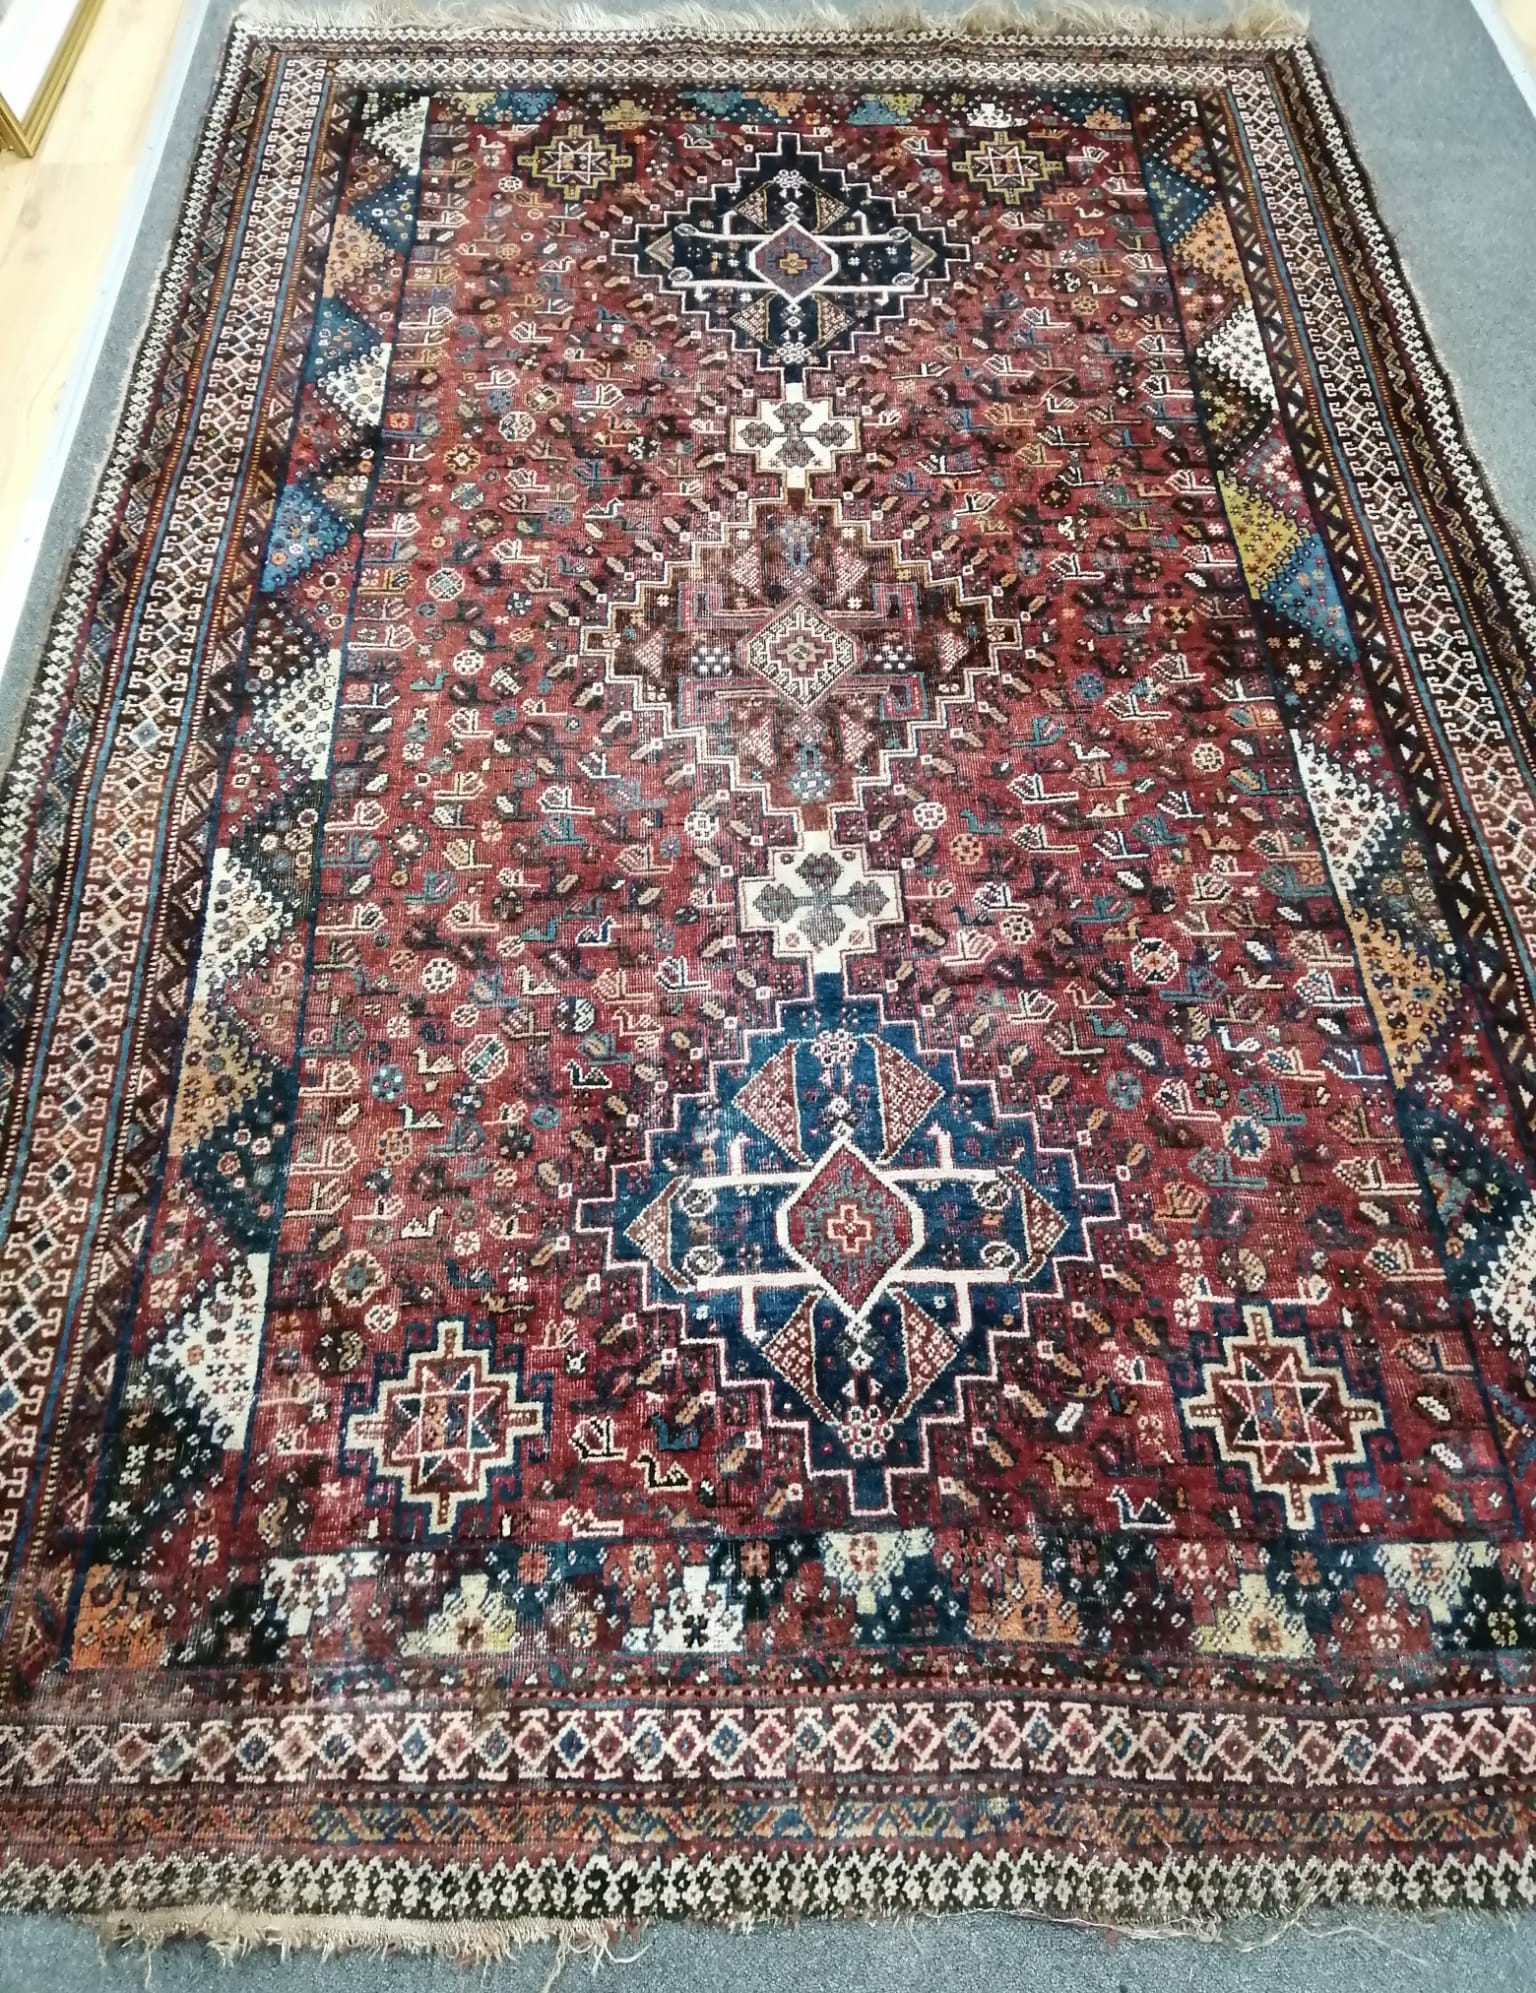 A North West Persian red ground rug, a Tabriz blue ground rug and two smaller modern rugs, largest 254 x 172cm                                                                                                              